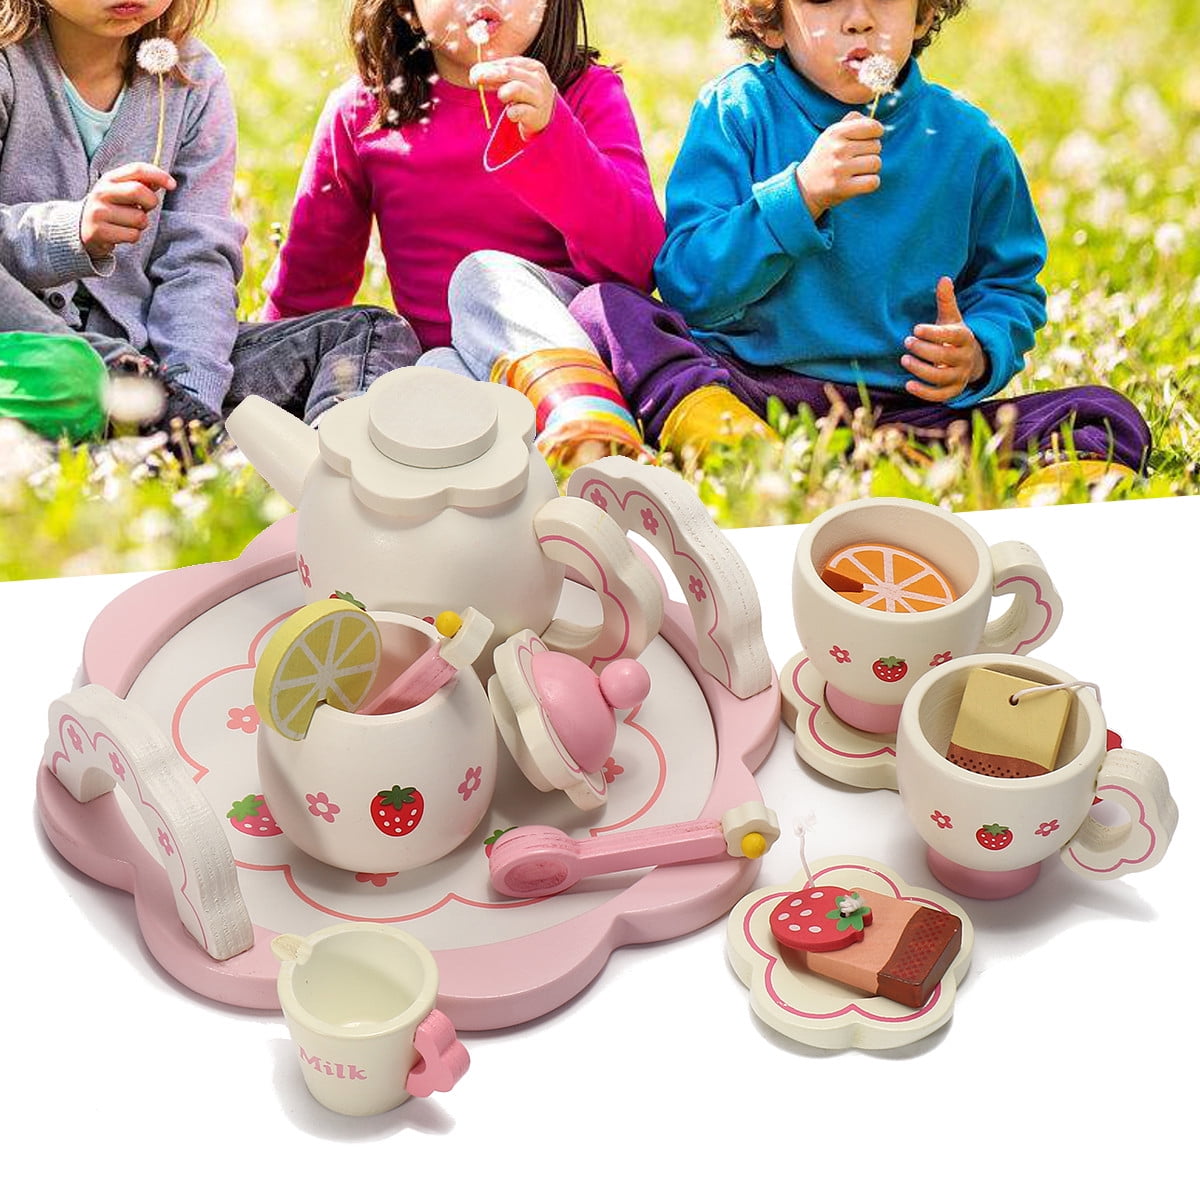 My Play Wooden Toy Afternoon Tea Set Kit Kids Children Role Play 17pc Gift NEW 